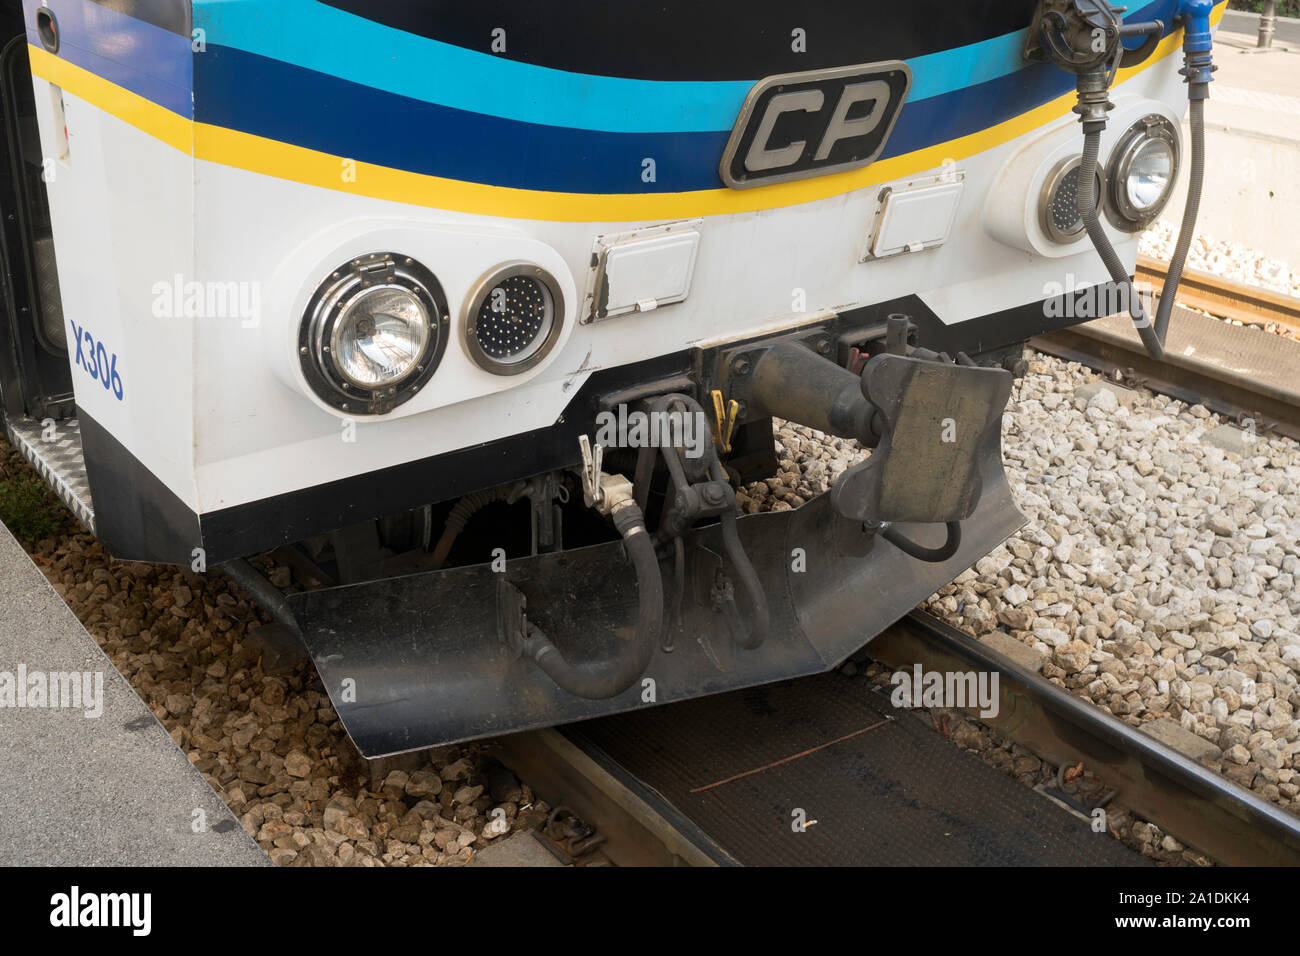 Detail view of snow plough and couplings on Gare des Chemins de Fer de Provence railcar in Nice, France, Europe Stock Photo